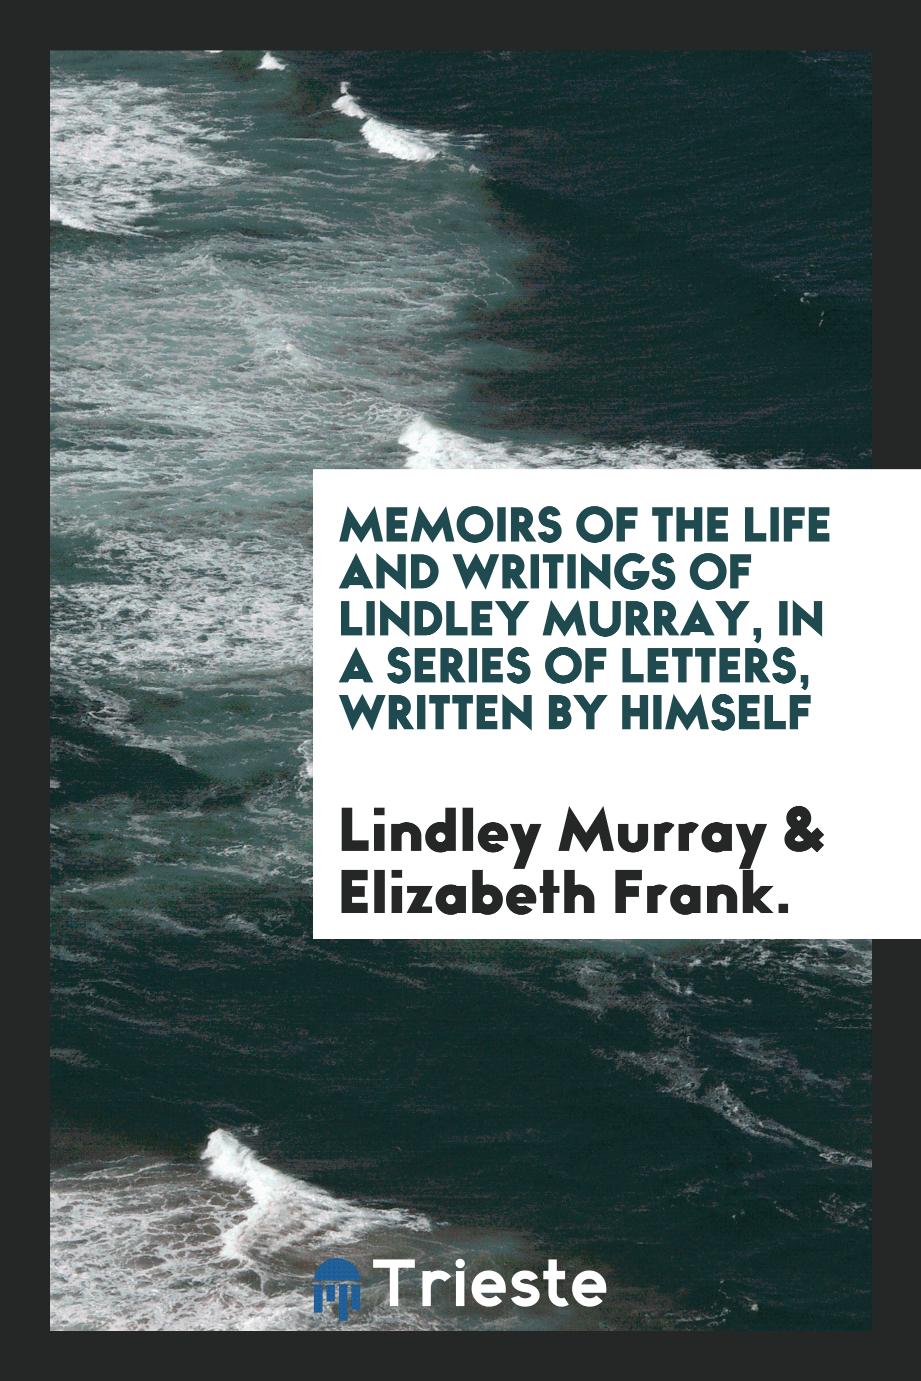 Memoirs of the Life and Writings of Lindley Murray, in a Series of Letters, Written by Himself